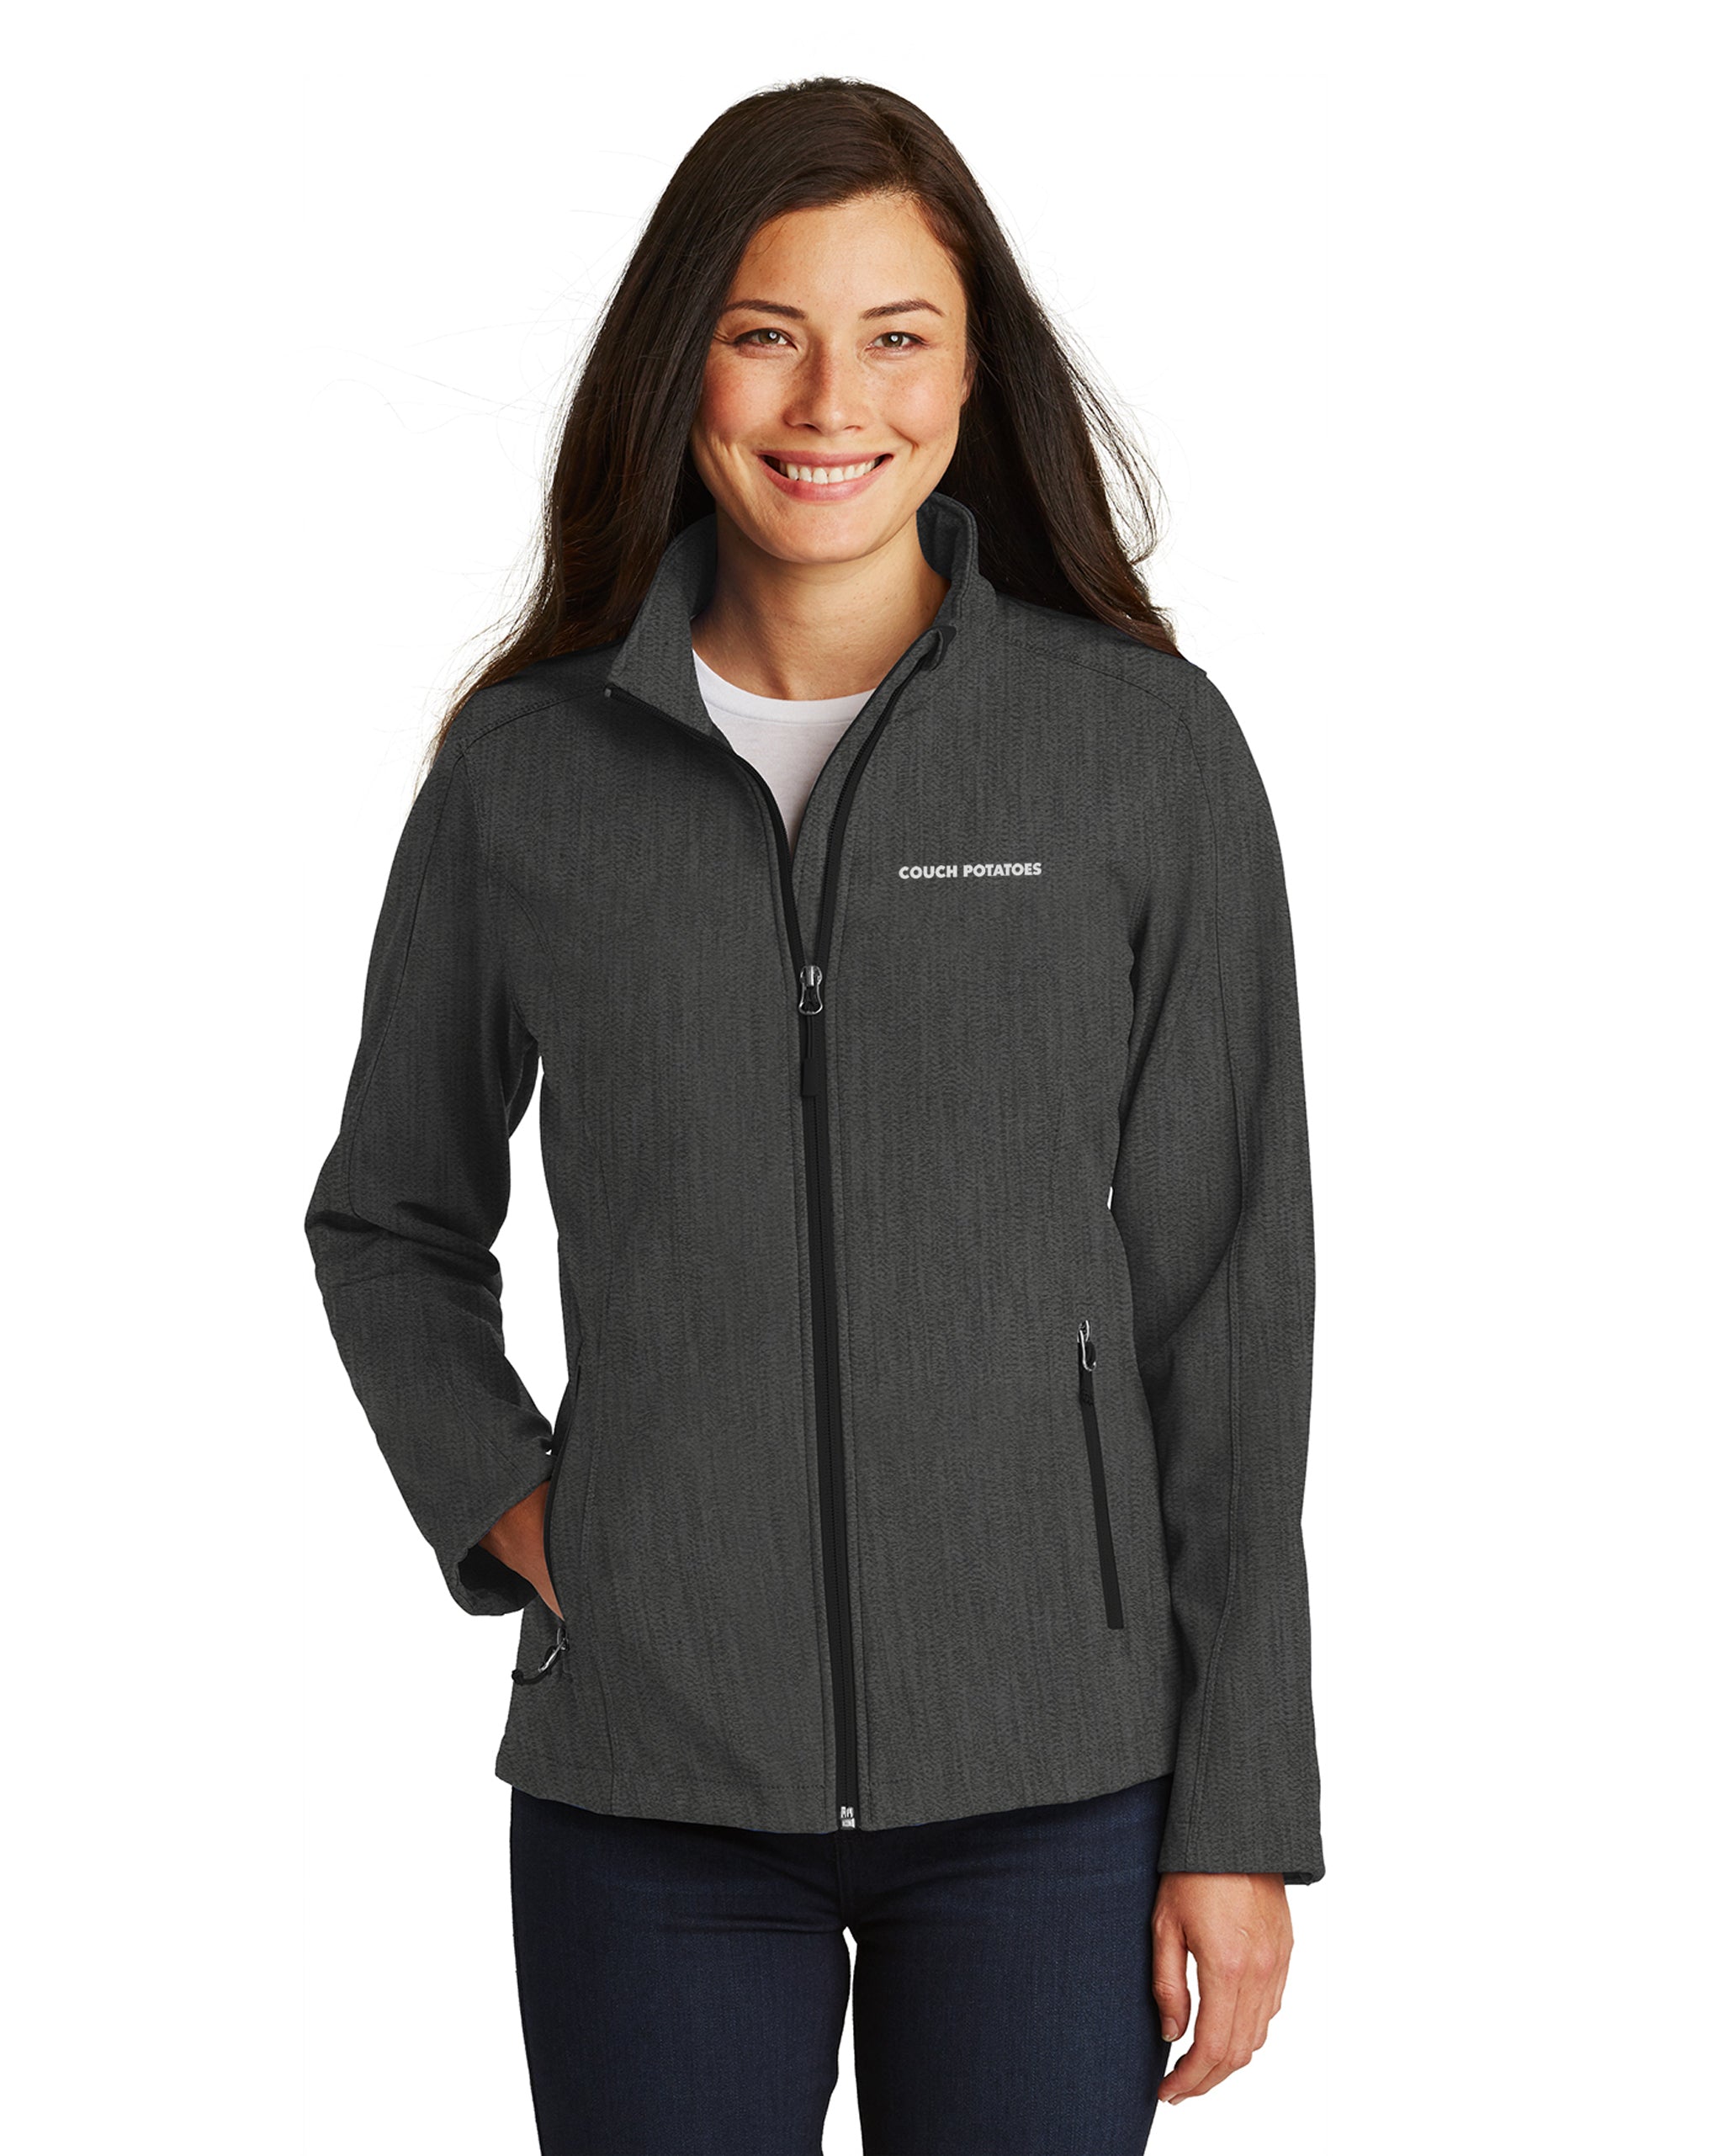 Couch Potatoes - Port Authority Ladies Core Soft Shell Jacket - L317